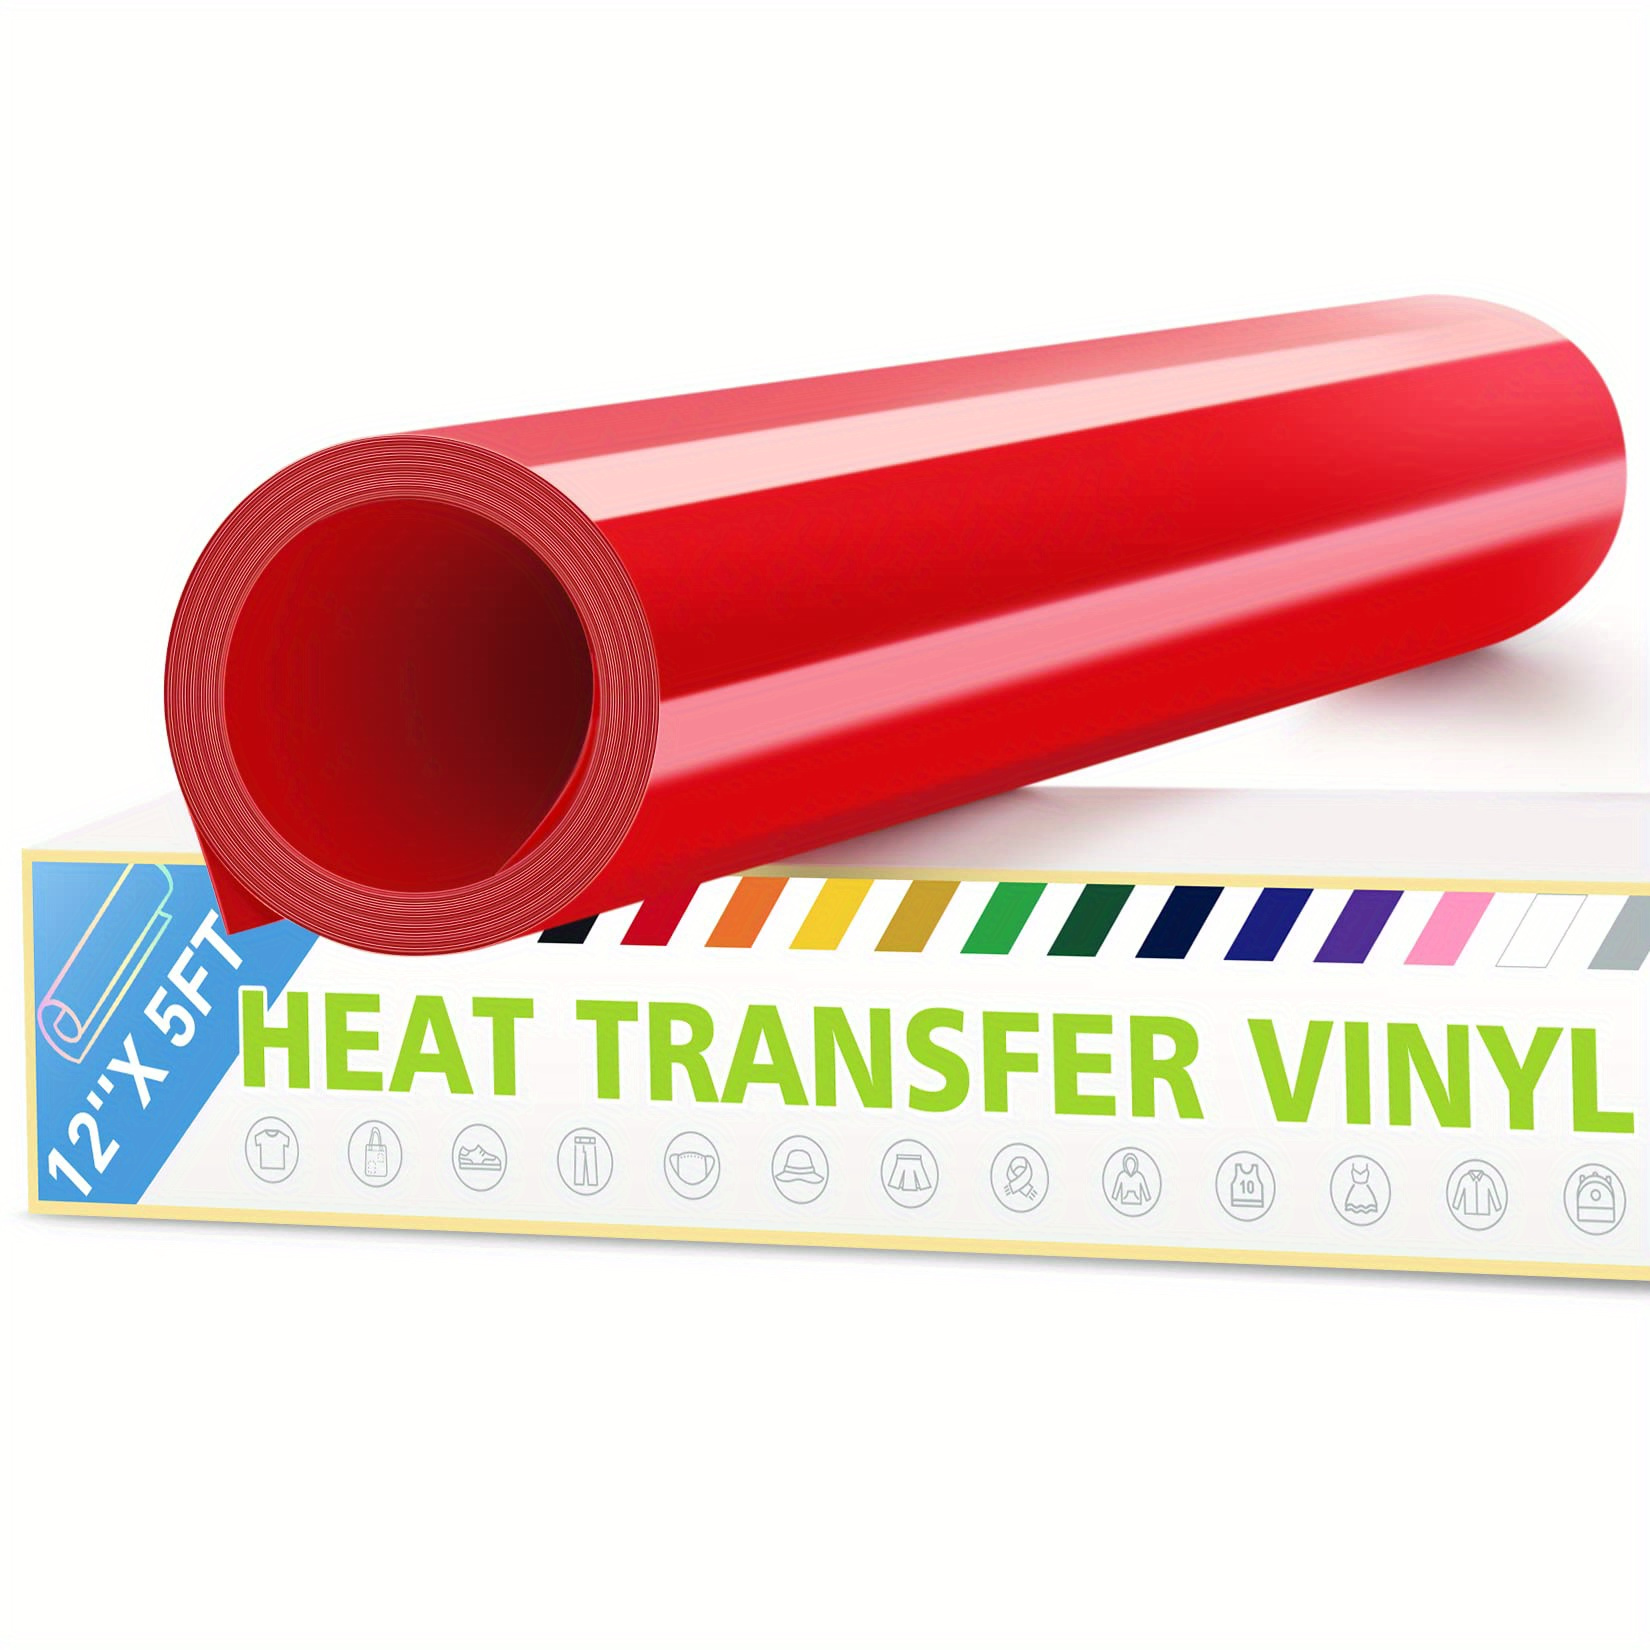 HTVRONT Heat Transfer Vinyl Black White and Red HTV Vinyl Rolls- 12 Rolls  12 x 5FT Black White and Red Iron On Vinyl for Shirts and Craft Projects